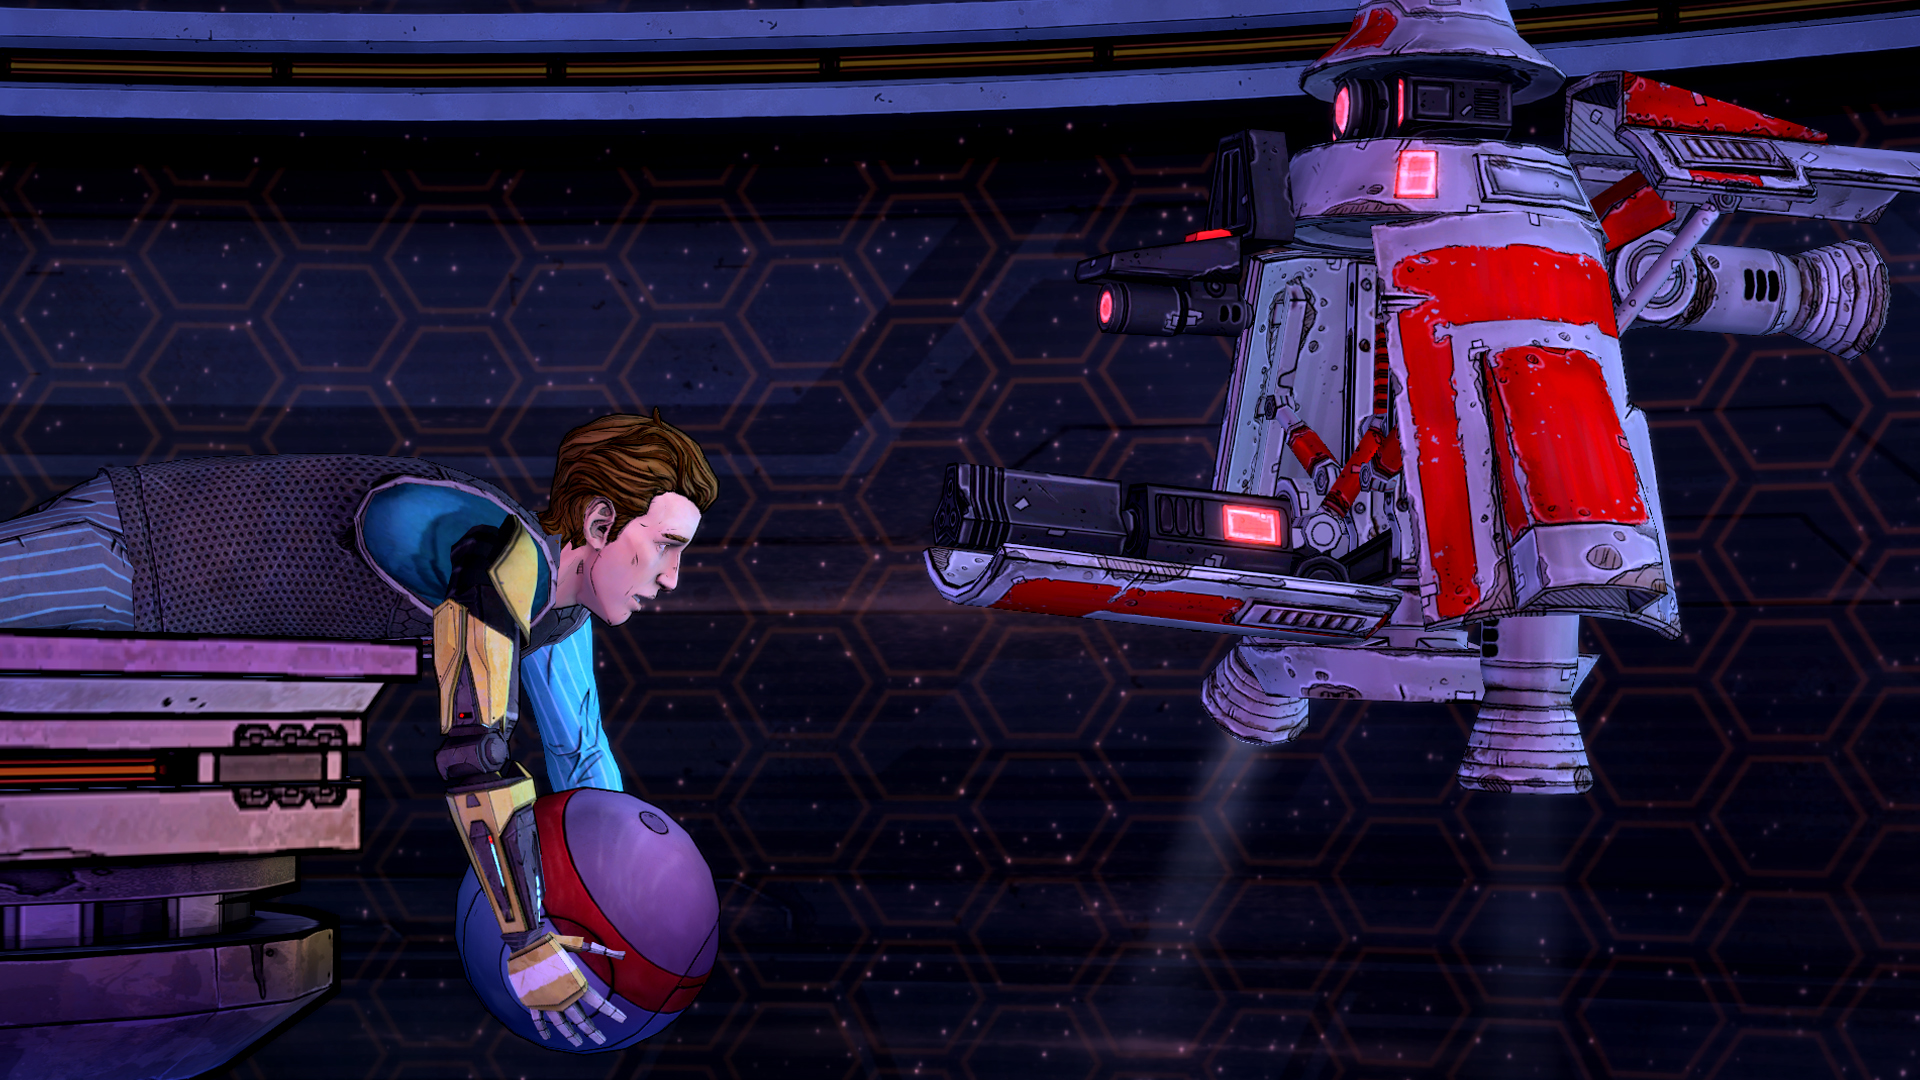 Tales from the Borderlands screenshot